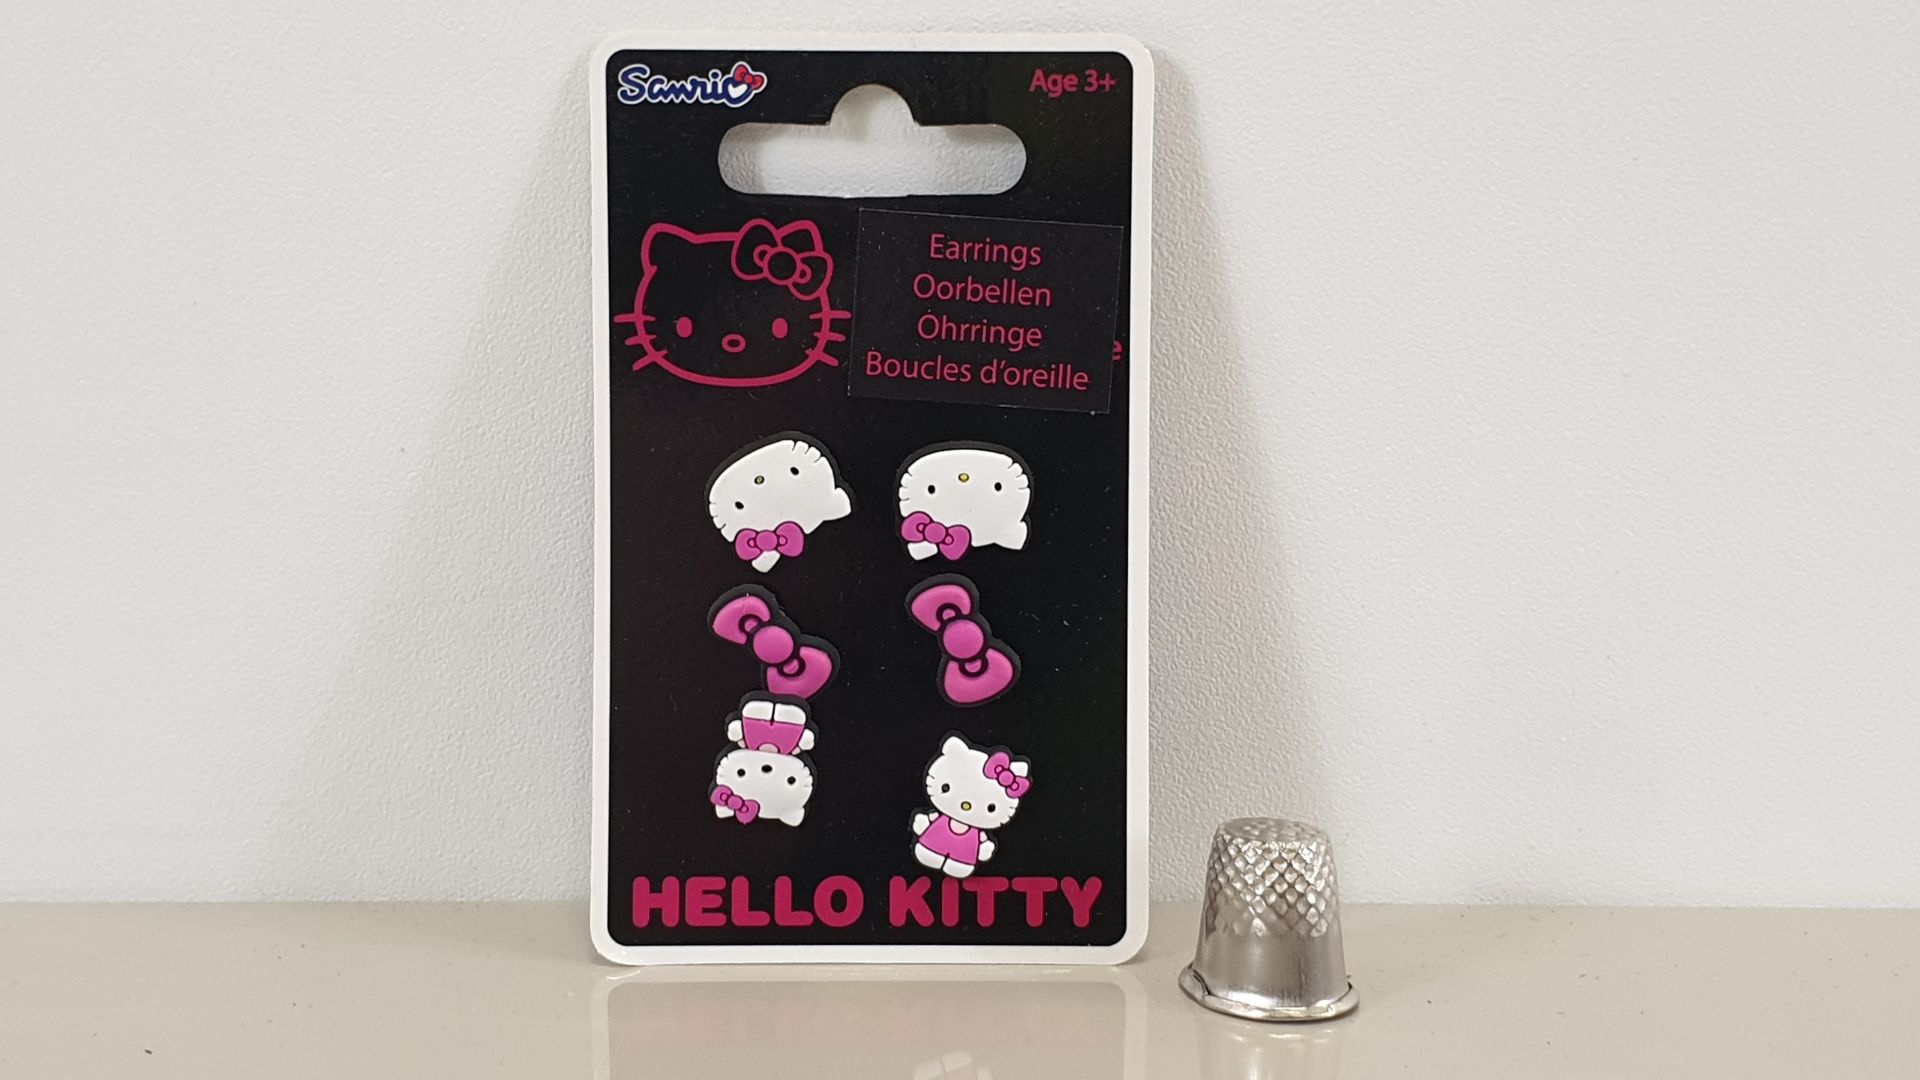 240 X HELLO KITTY PACKS OF 3 PAIR EARRINGS (CATS / BOWS) IN 10 CARTONS